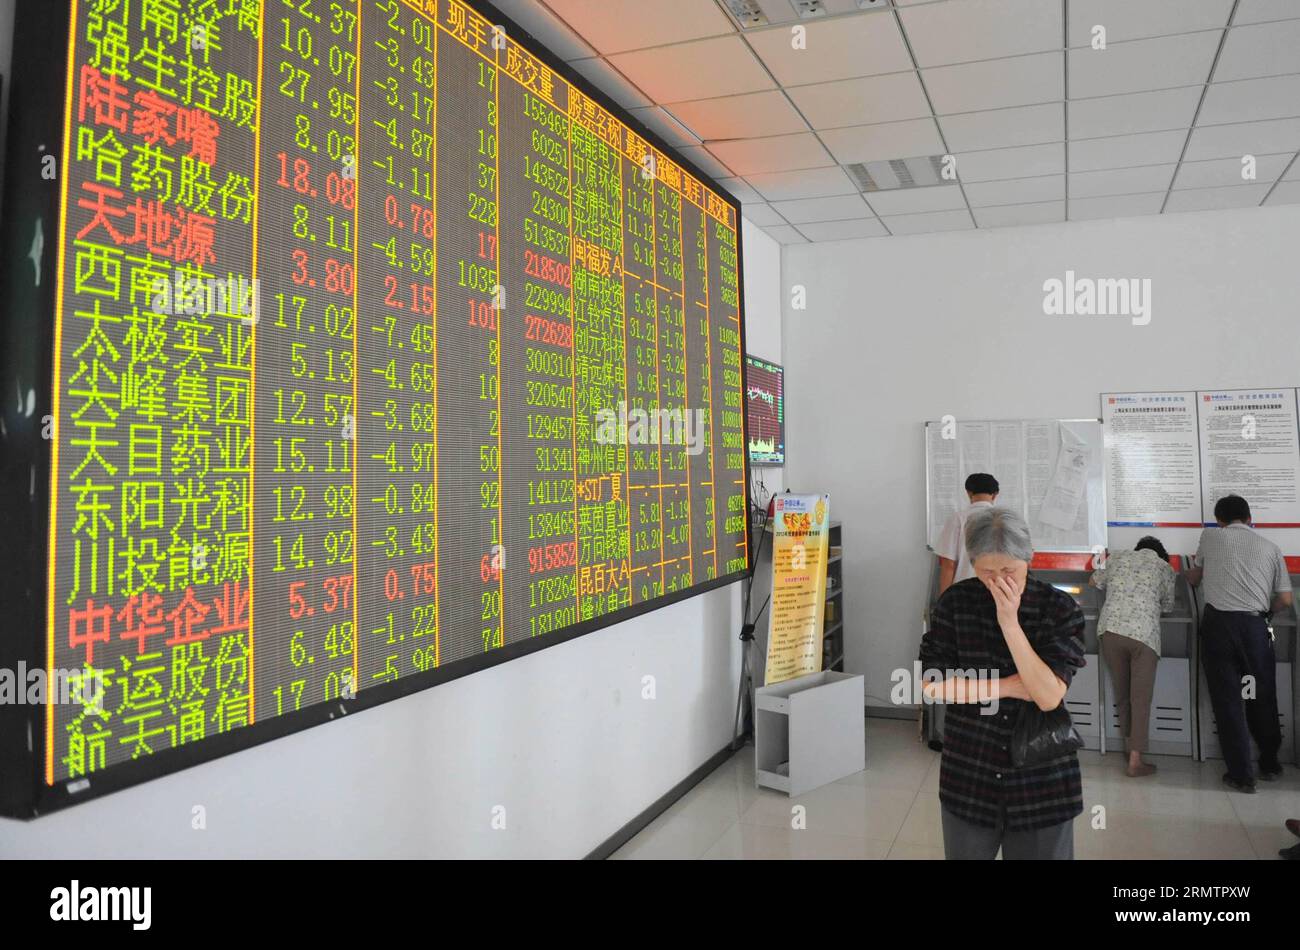 An investor walks past a screen showing stock information at a trading hall of a securities firm in Hangzhou, capital of east China s Zhejiang Province, Sept. 16, 2014. Chinese shares closed lower on Tuesday, with the benchmark Shanghai Composite Index down 1.82 percent to finish at 2,296.55 points, owing to the plunge of growth enterprises. The smaller Shenzhen Component Index lost 191.57 points, or 2.36 percent, to close at 7,921.07 points. () (ry) CHINA-STOCK-DROP (CN) Xinhua PUBLICATIONxNOTxINxCHN   to Investor Walks Past a Screen showing Stick Information AT a Trading Hall of a Securities Stock Photo